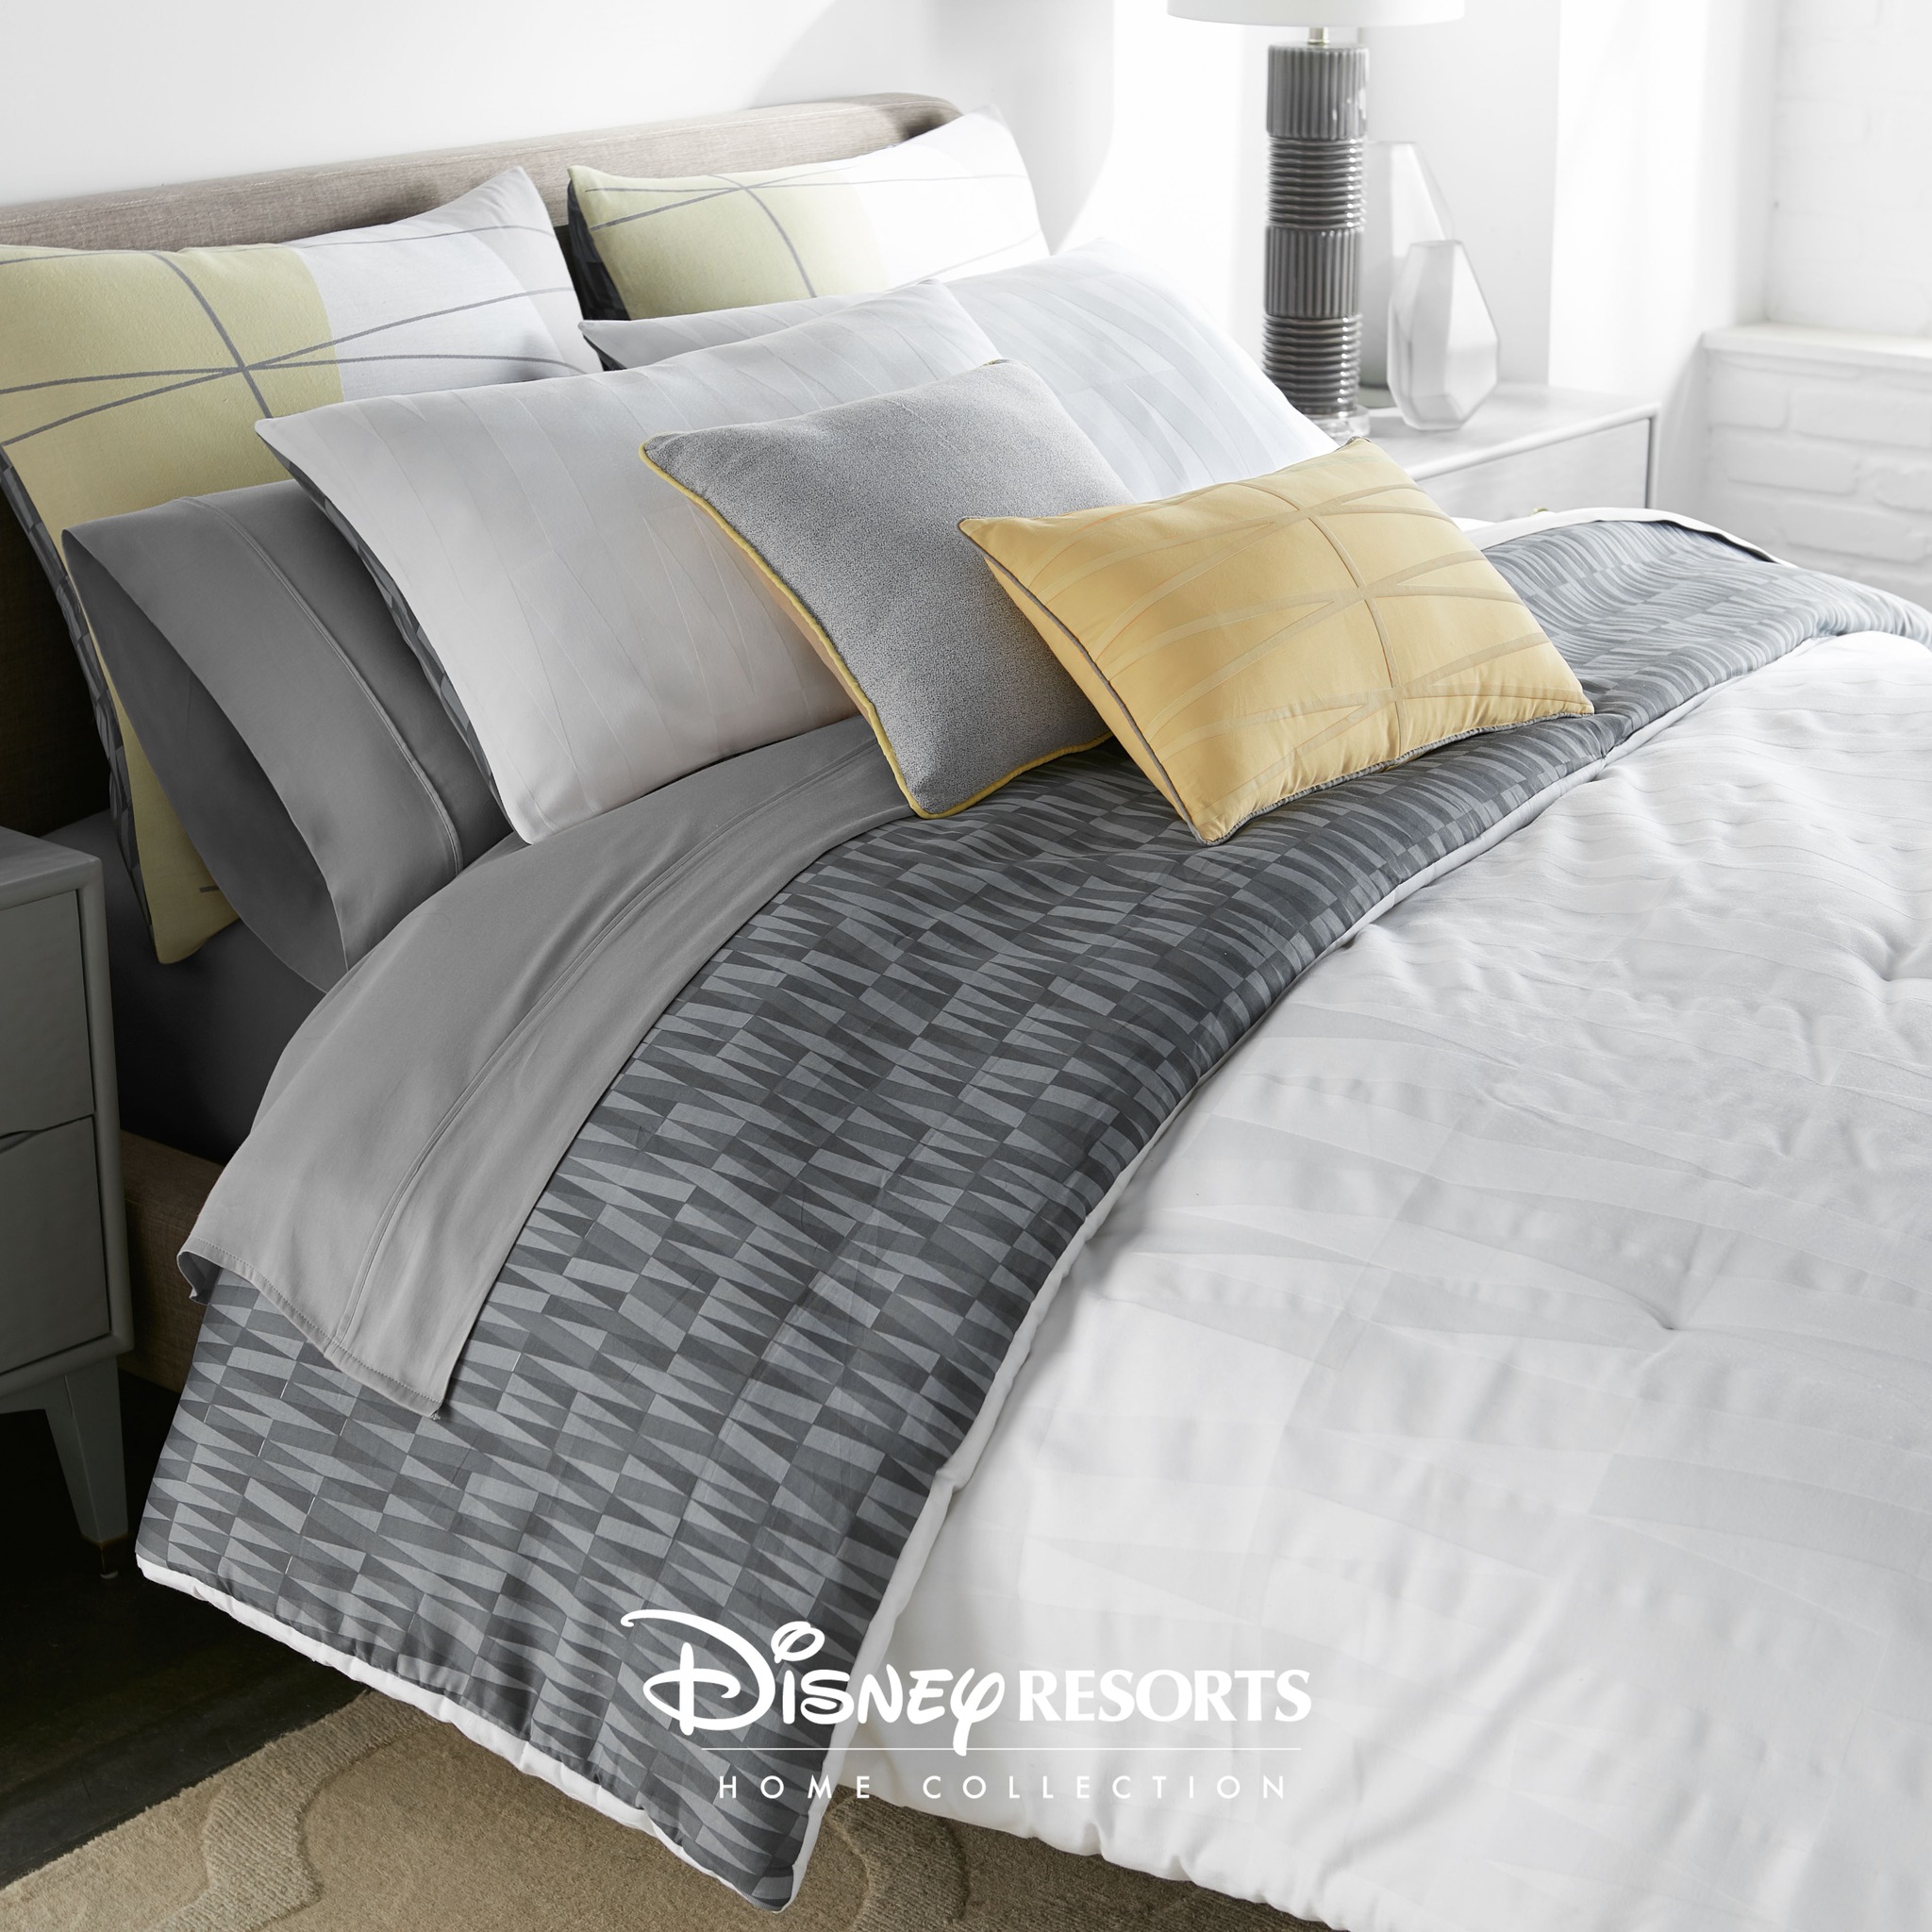 Disney Metropolitan Bed Set: Experience urban luxury with gray and white patterns, adding contemporary flair to your bedroom ensemble.